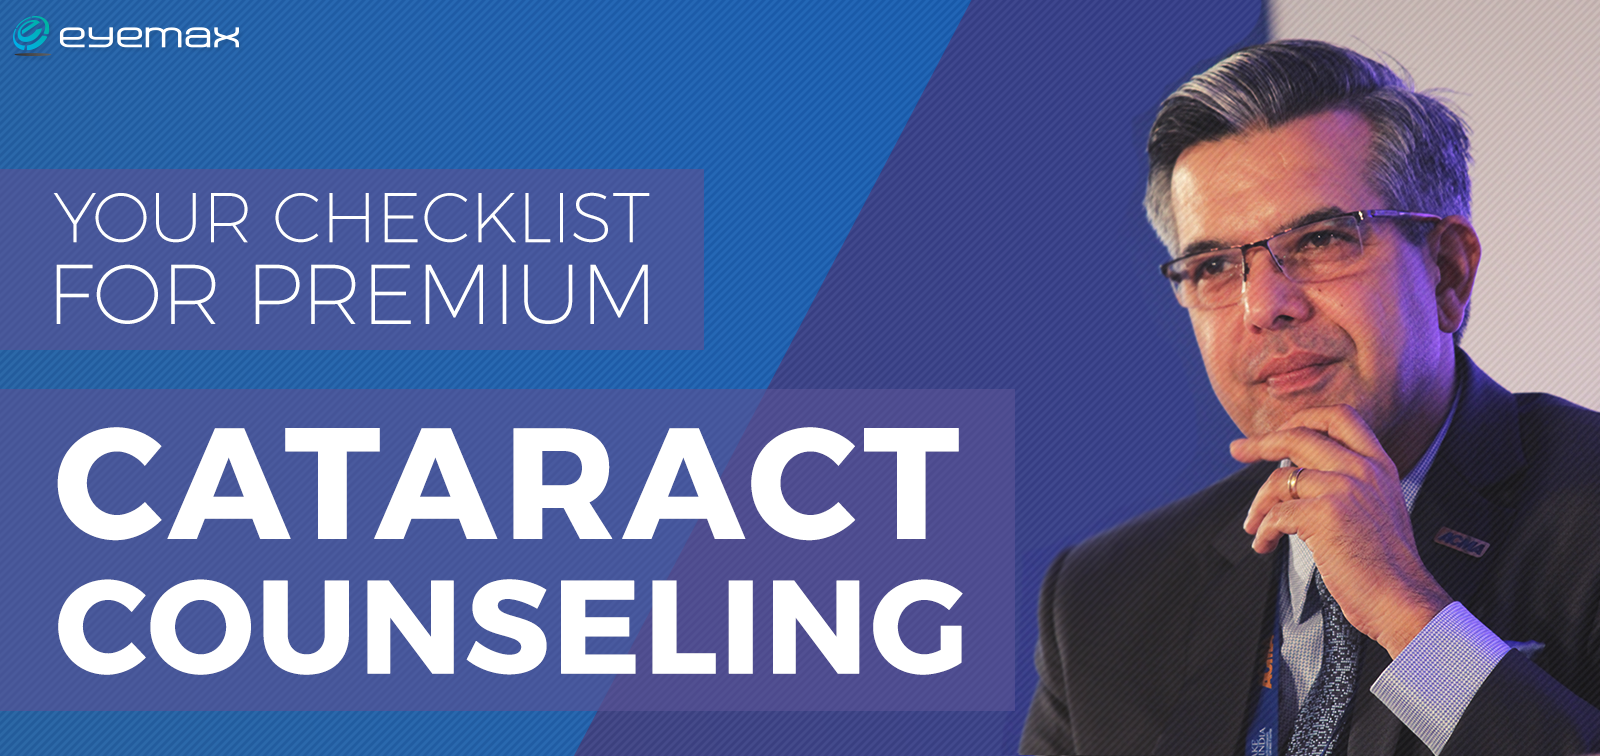 Your Checklist for Premium Cataract Counseling